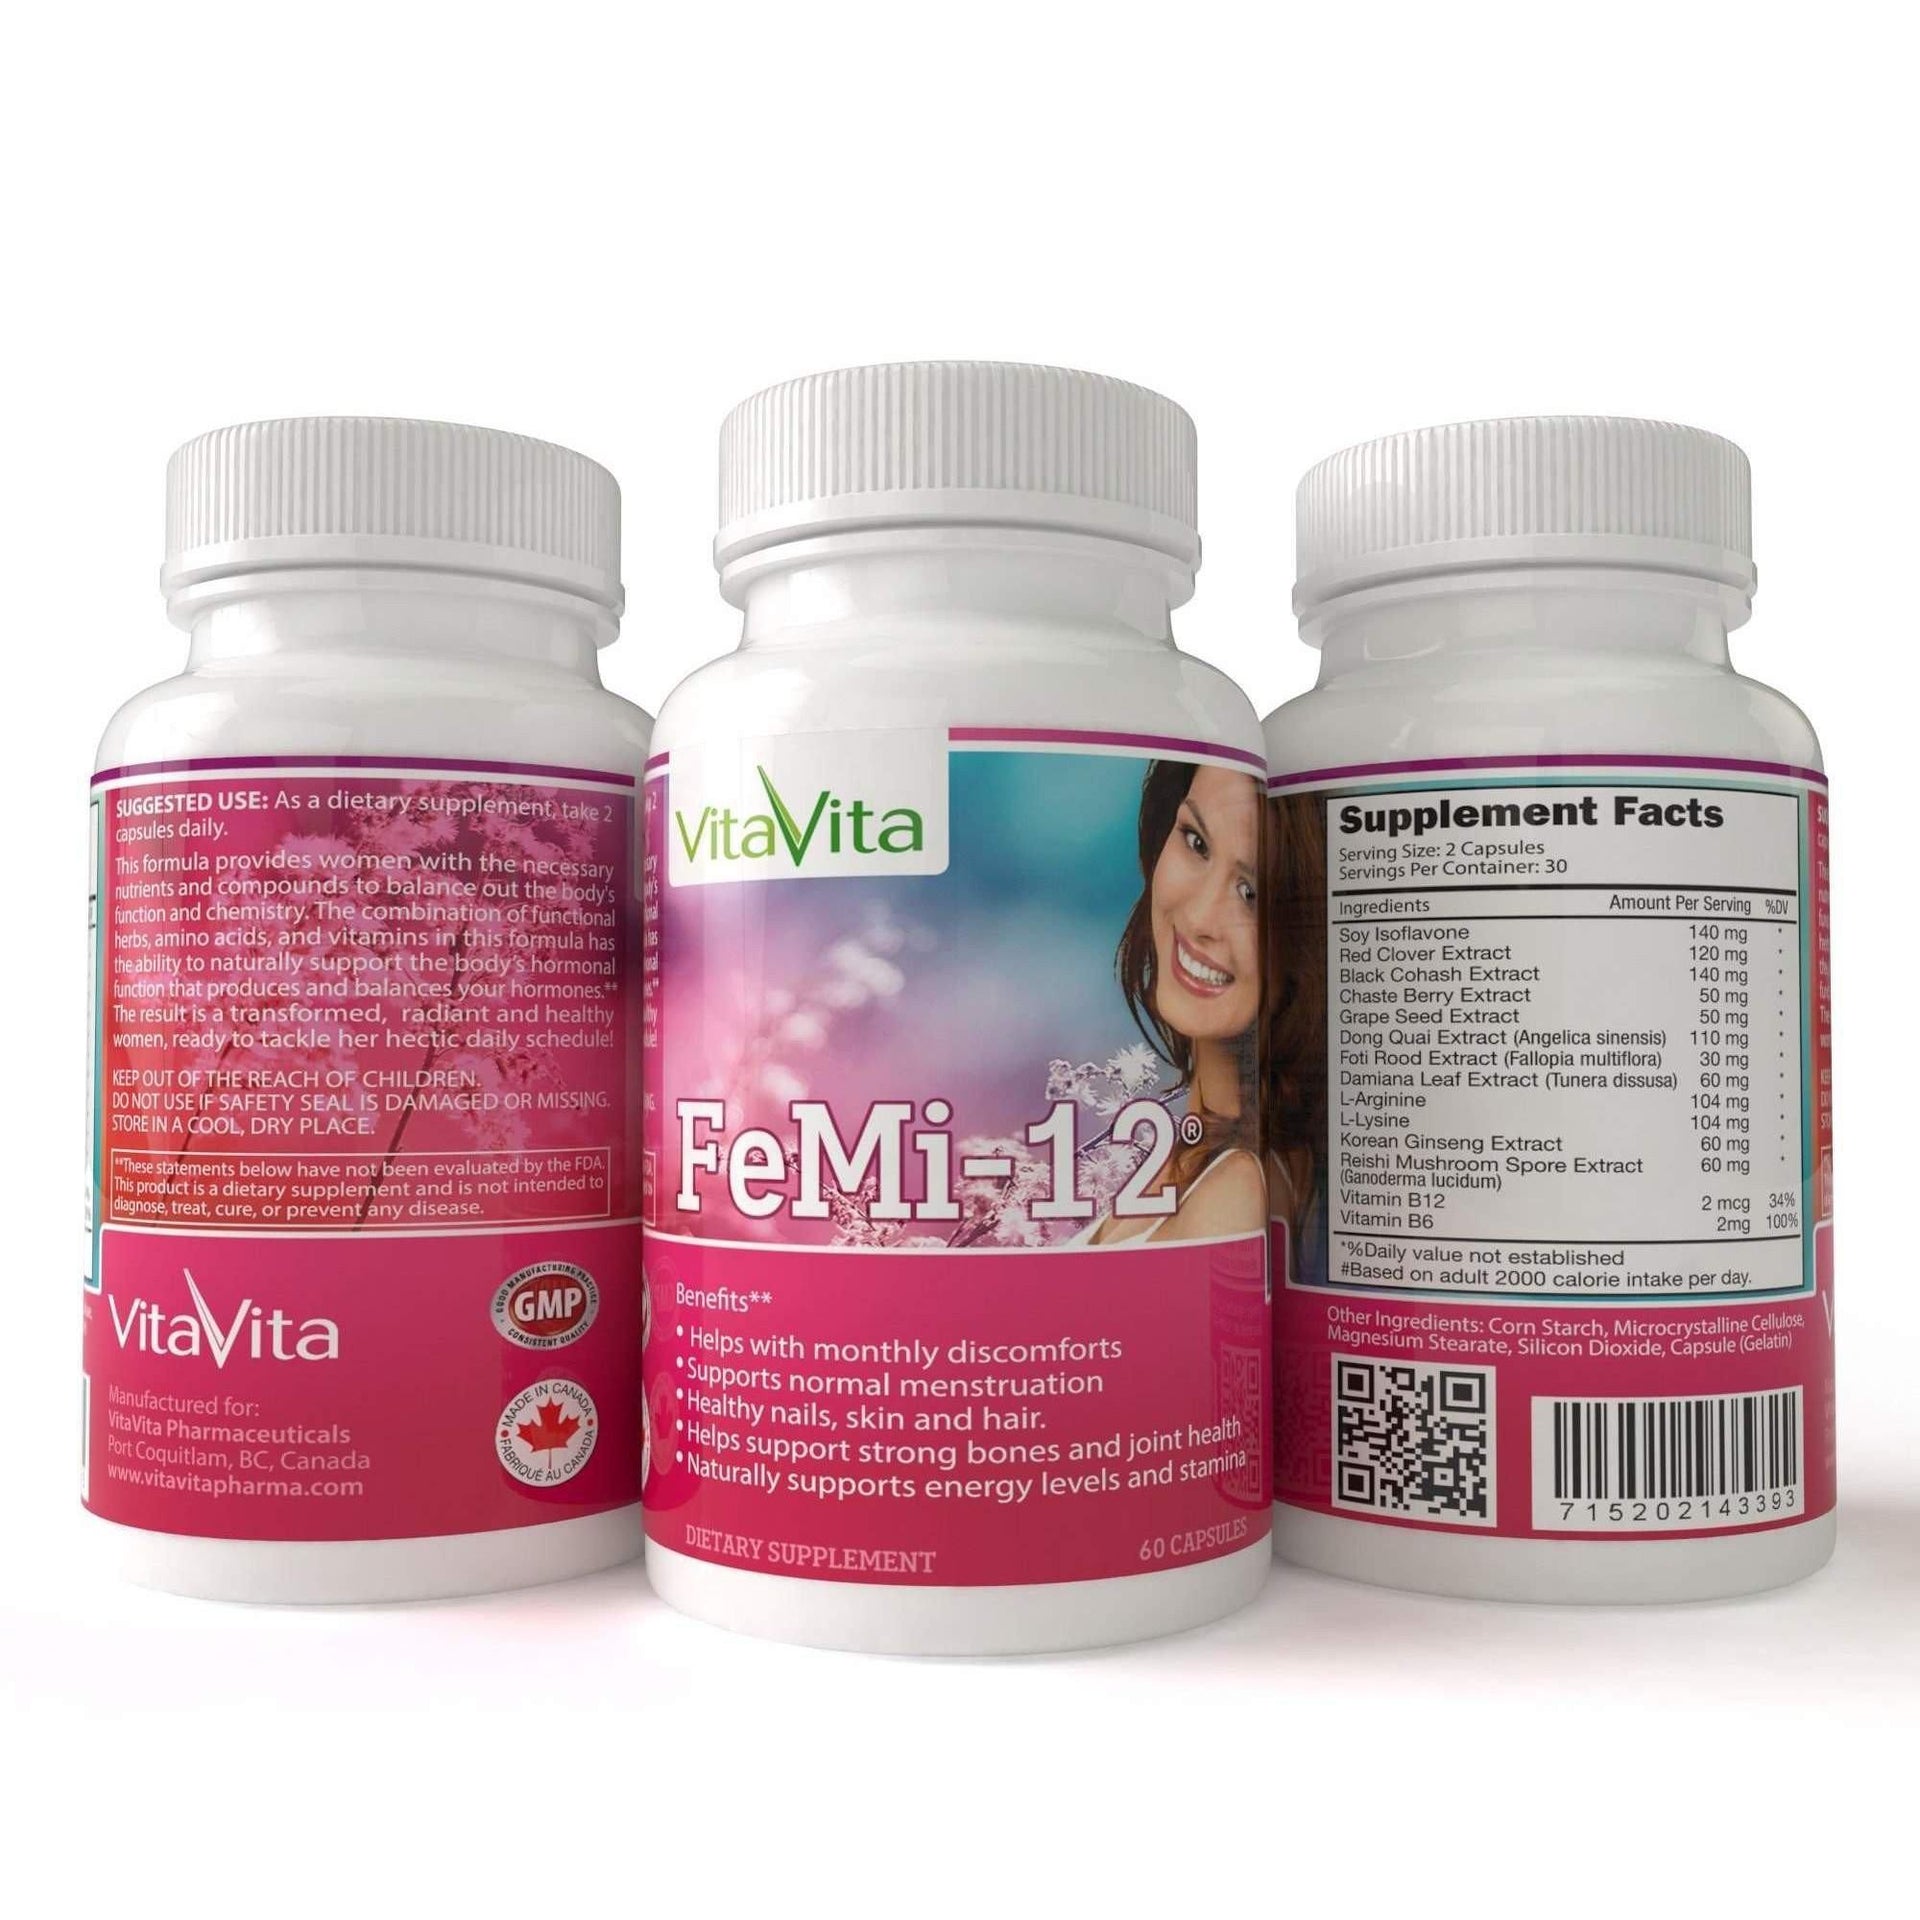 FeMi-12, Natural Aging Support Formula for Women (60 Capsules) - Buy at New Green Nutrition